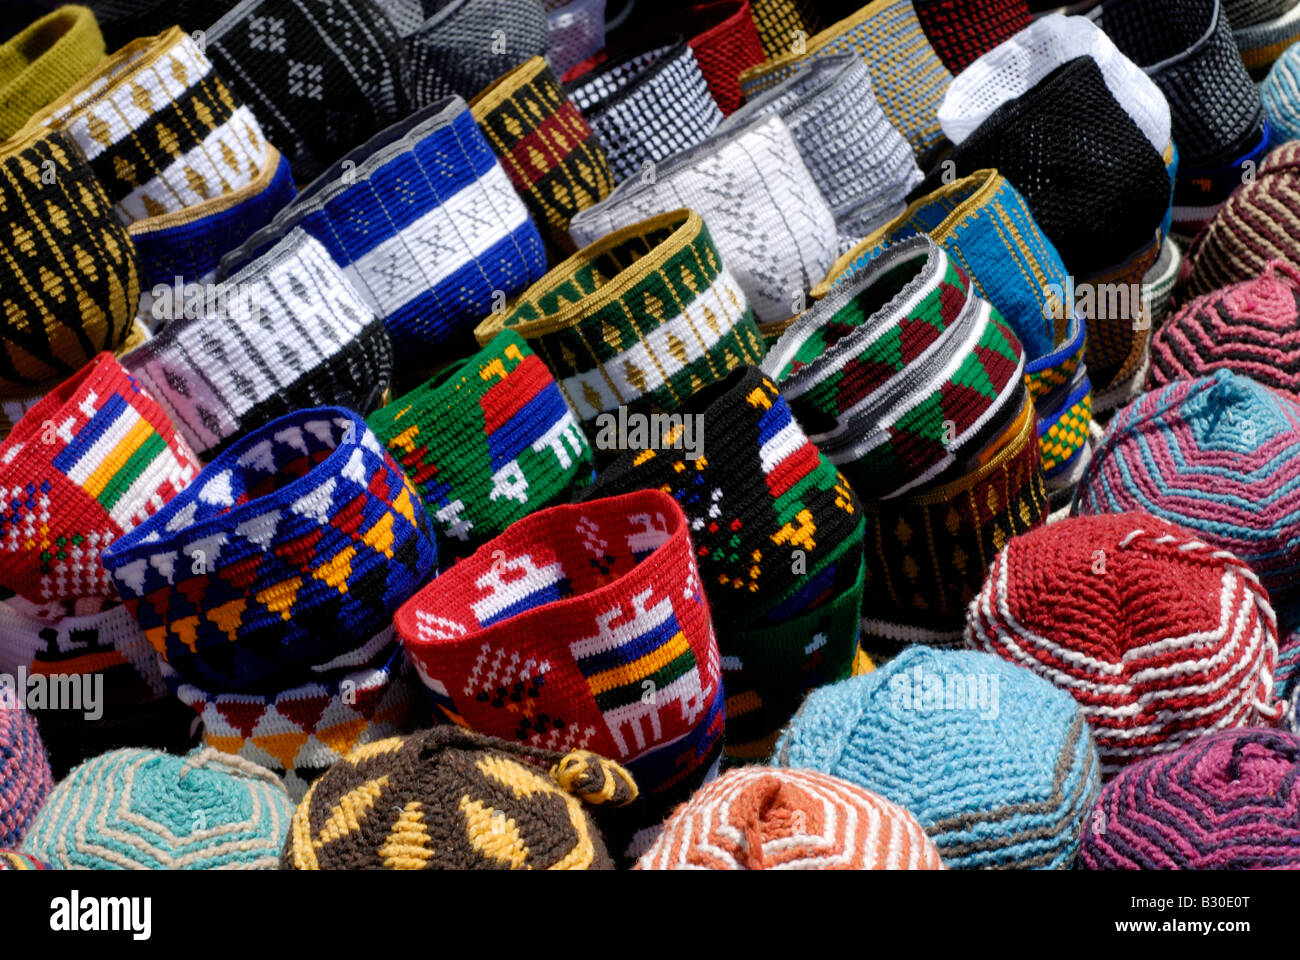 Hats for sale in the souk Marrakesh, North Africa exotic girts memories of visit to Marrakech Market Spice souk. Stock Photo